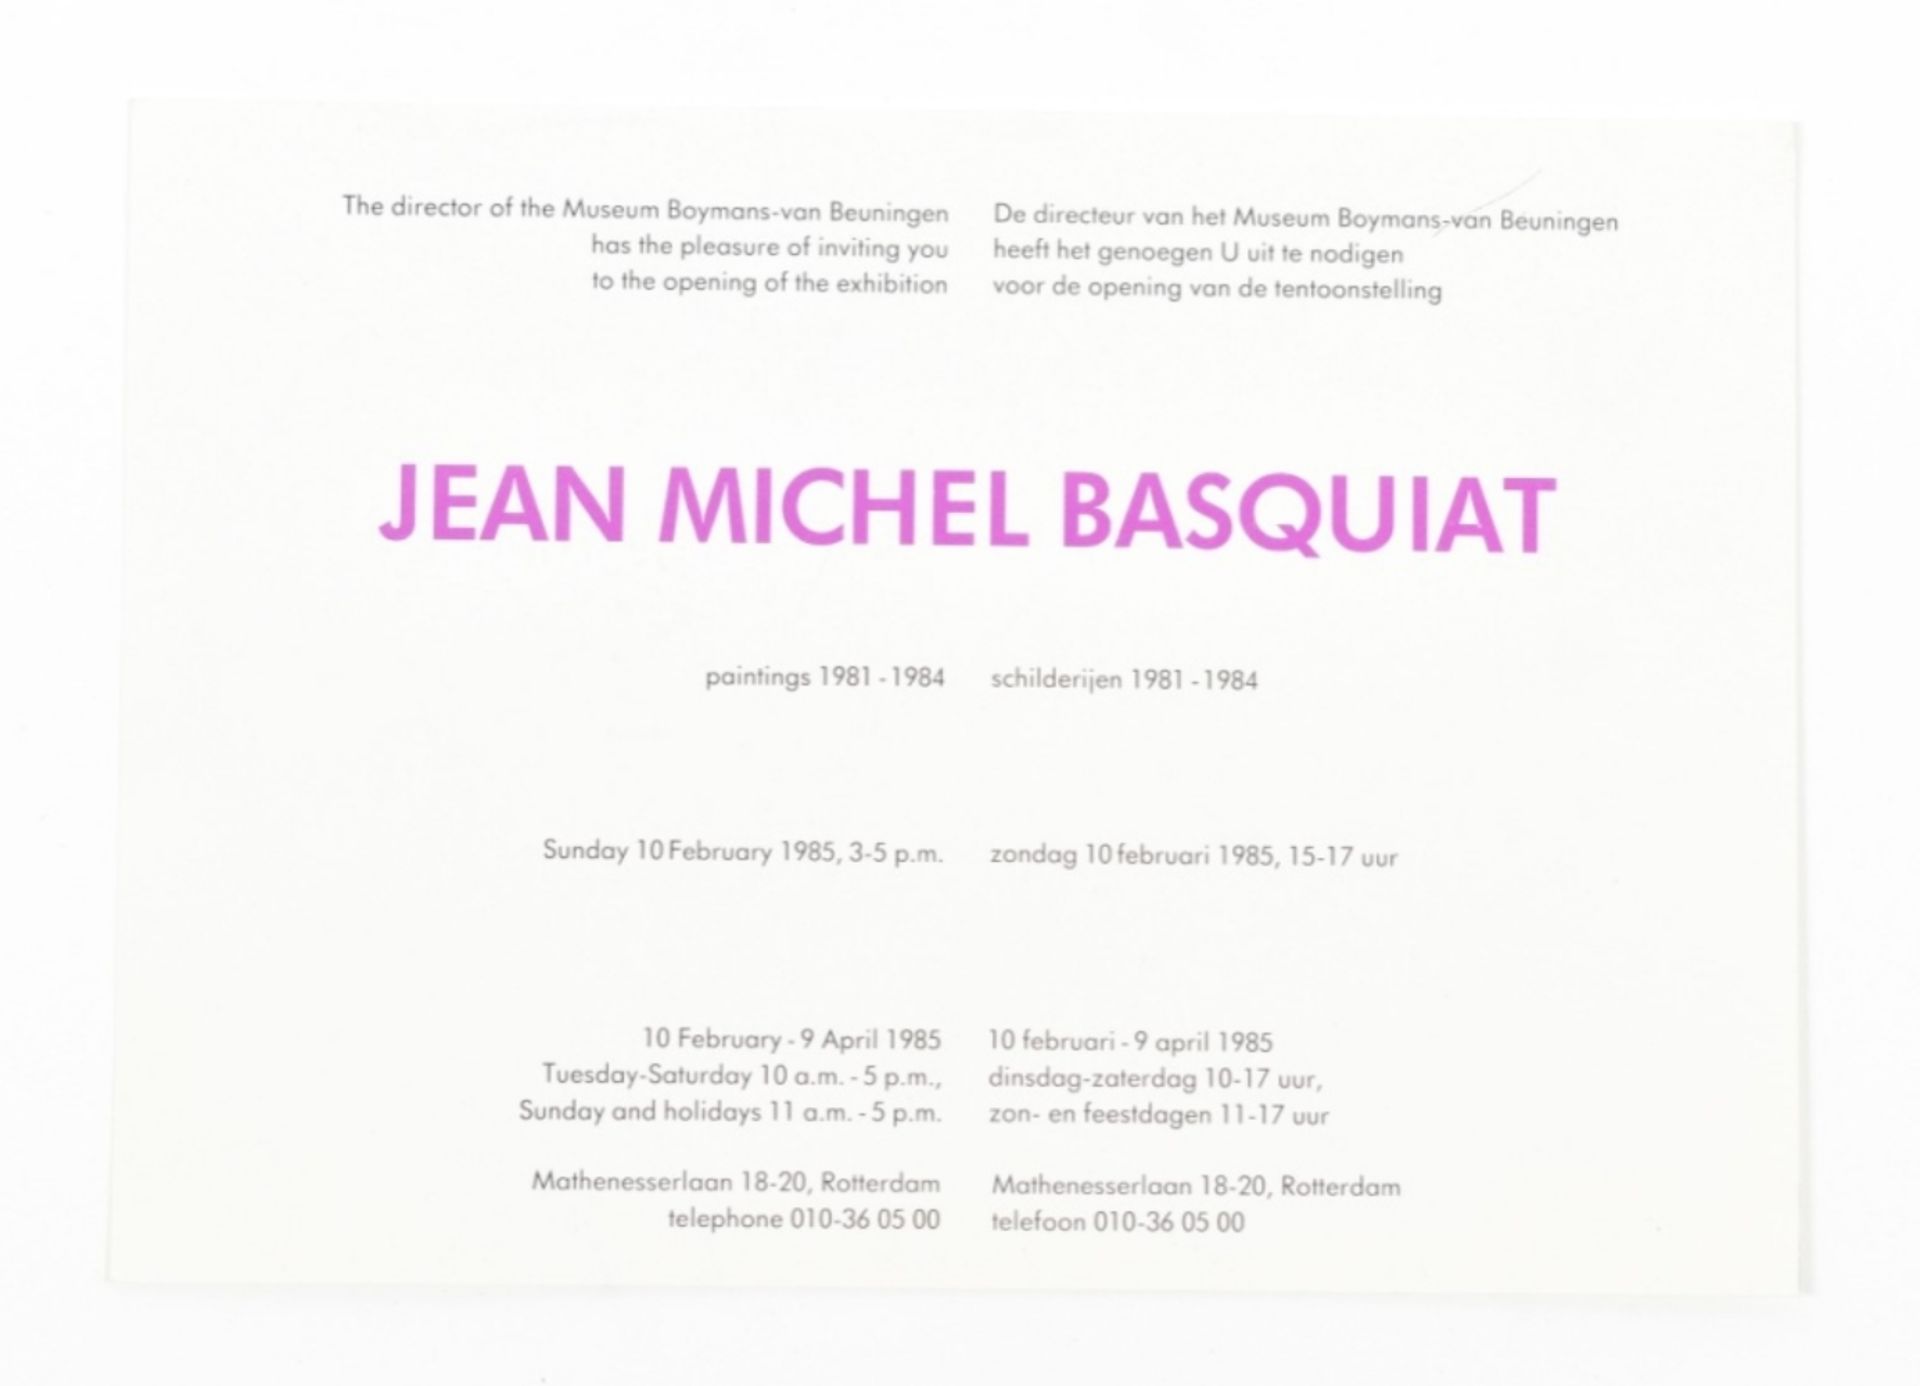 [s and up] Jean-Michel Basquiat, Paintings 1981-1984 with invitation card - Image 4 of 9